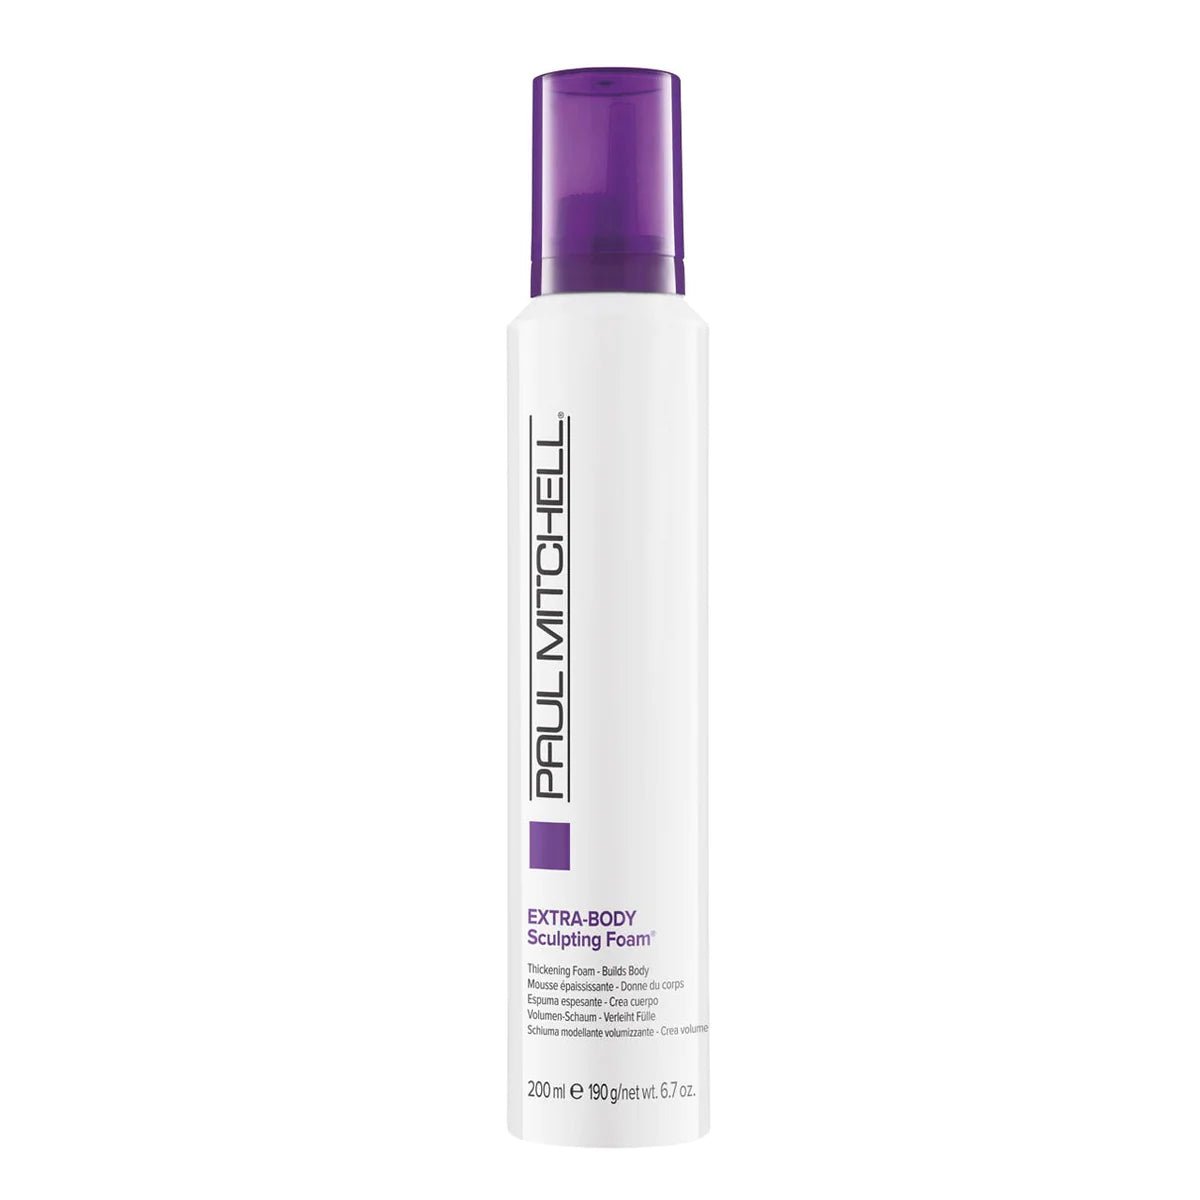 Paul Mitchell Extra Body Sculpting Foam Mousse 200Ml - AllurebeautypkPaul Mitchell Extra Body Sculpting Foam Mousse 200Ml